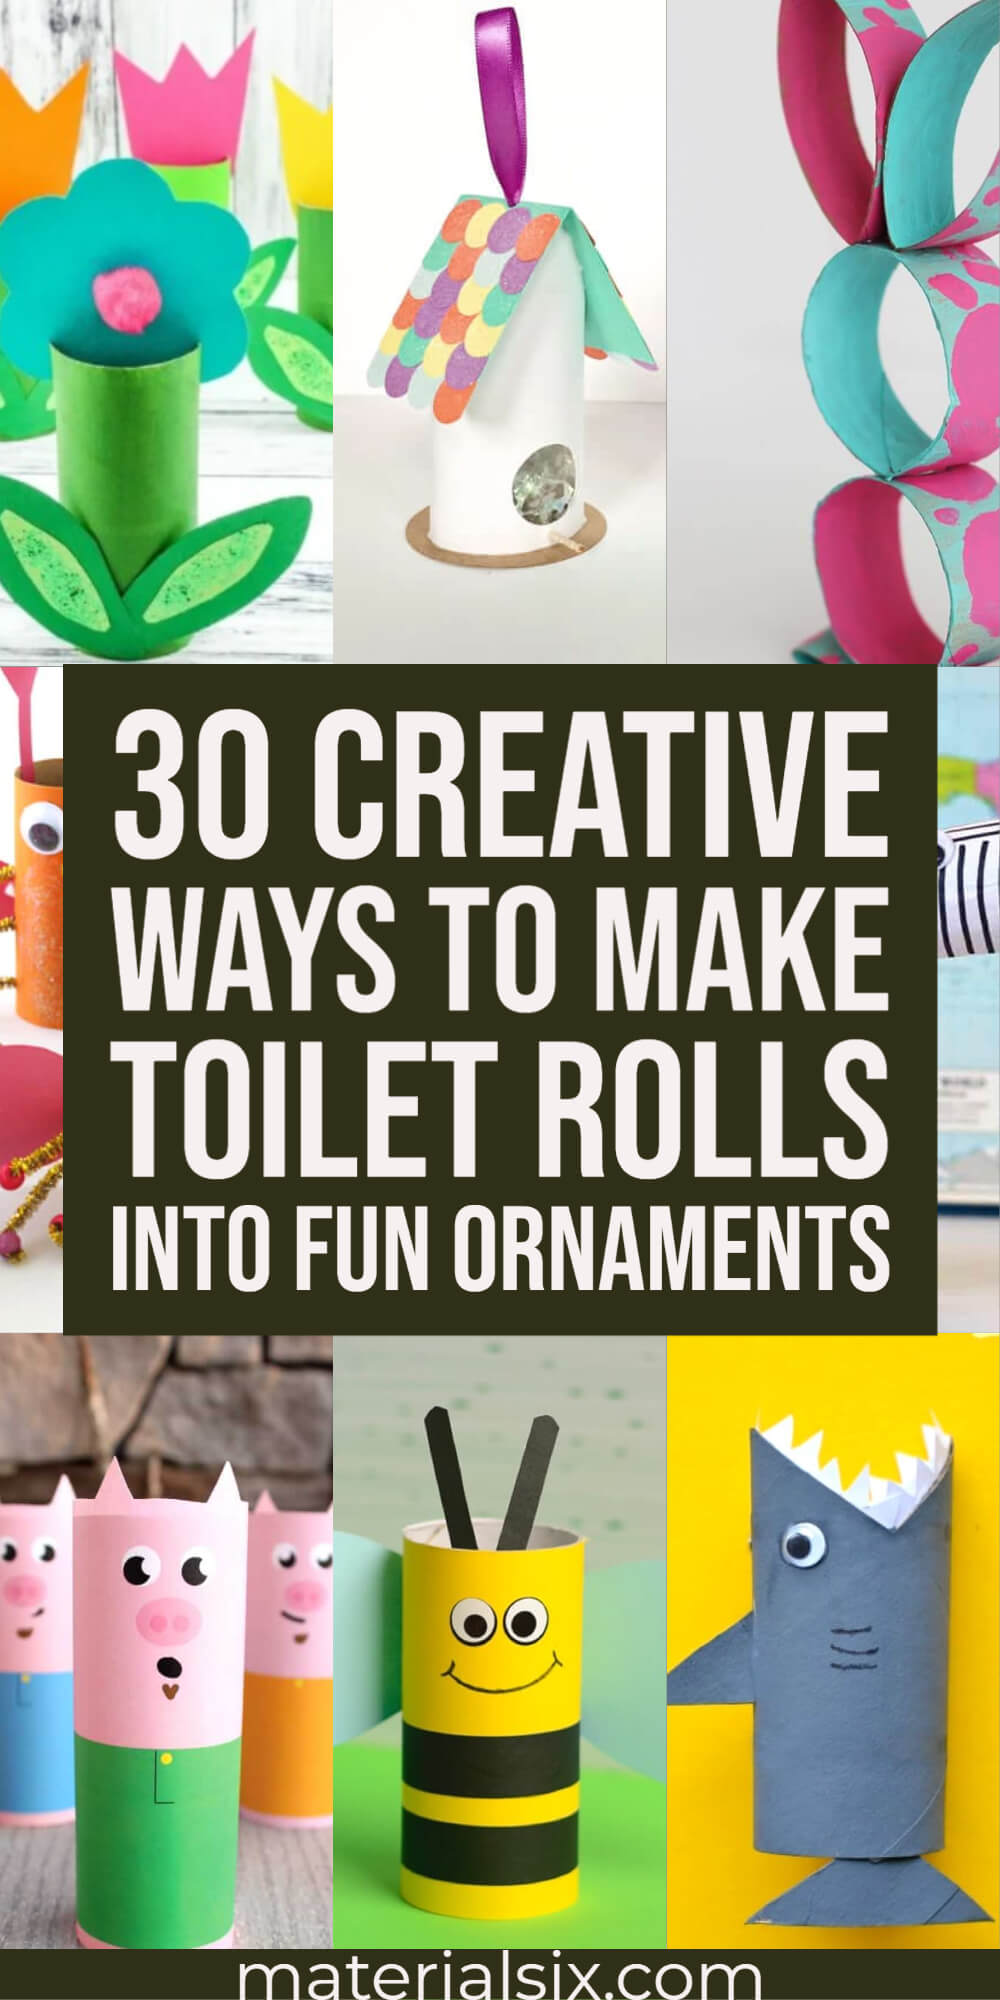 32 Best Toilet Roll Craft Ideas for Your Recycle Project